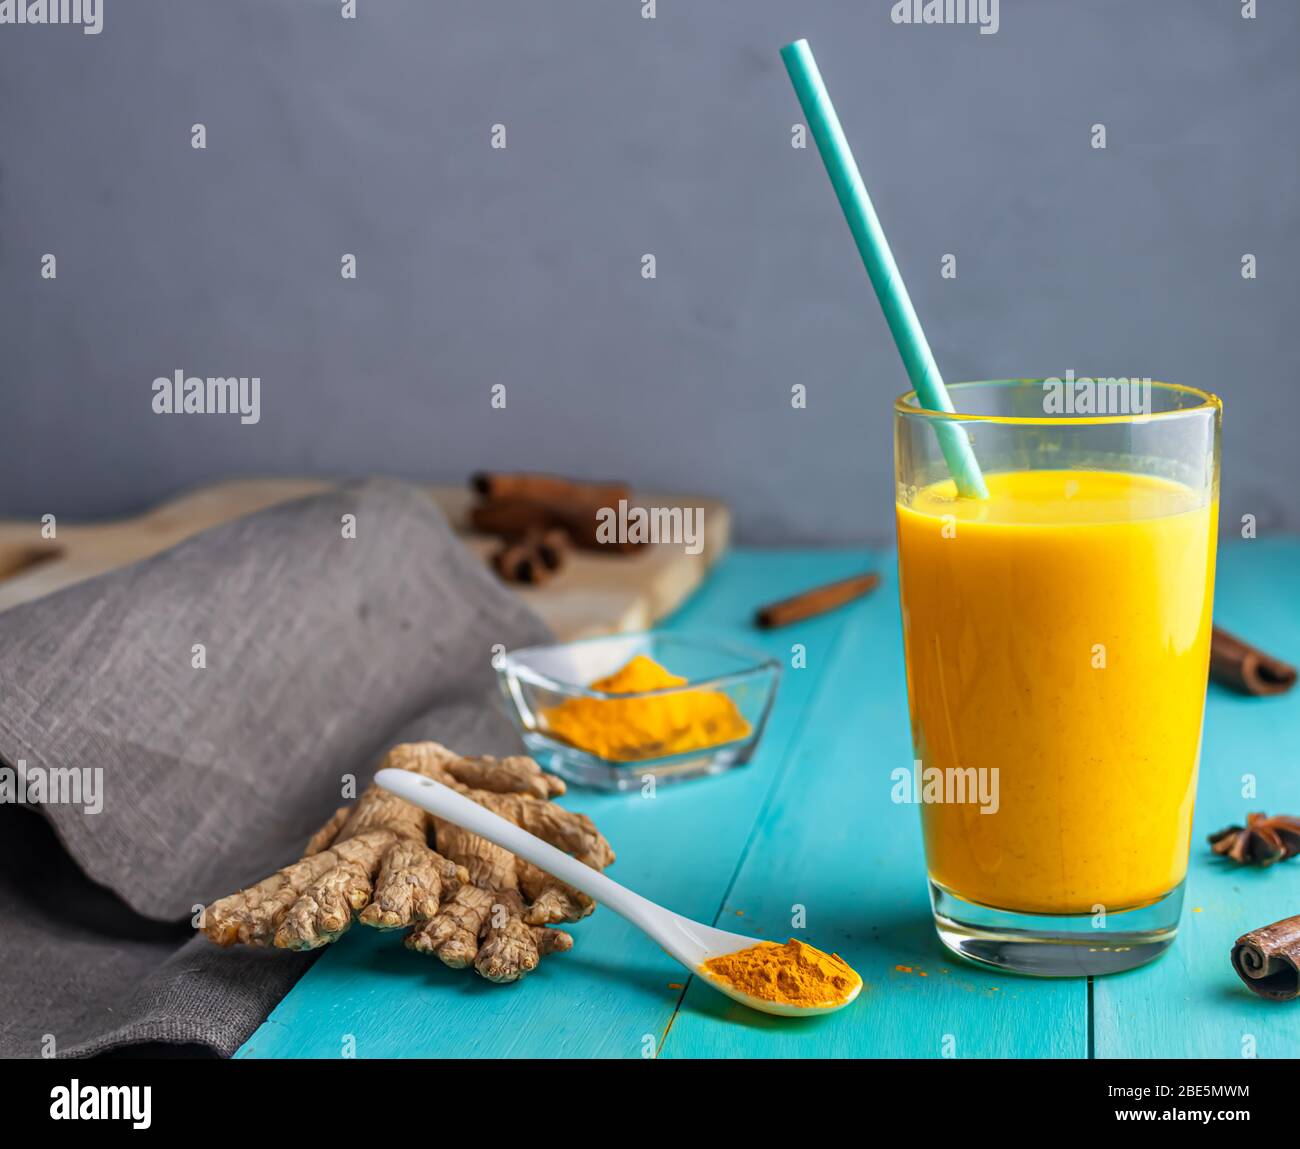 golden milk, milk with turmeric, spices. with a drinking tube. on a blue wooden background. with copy space Stock Photo